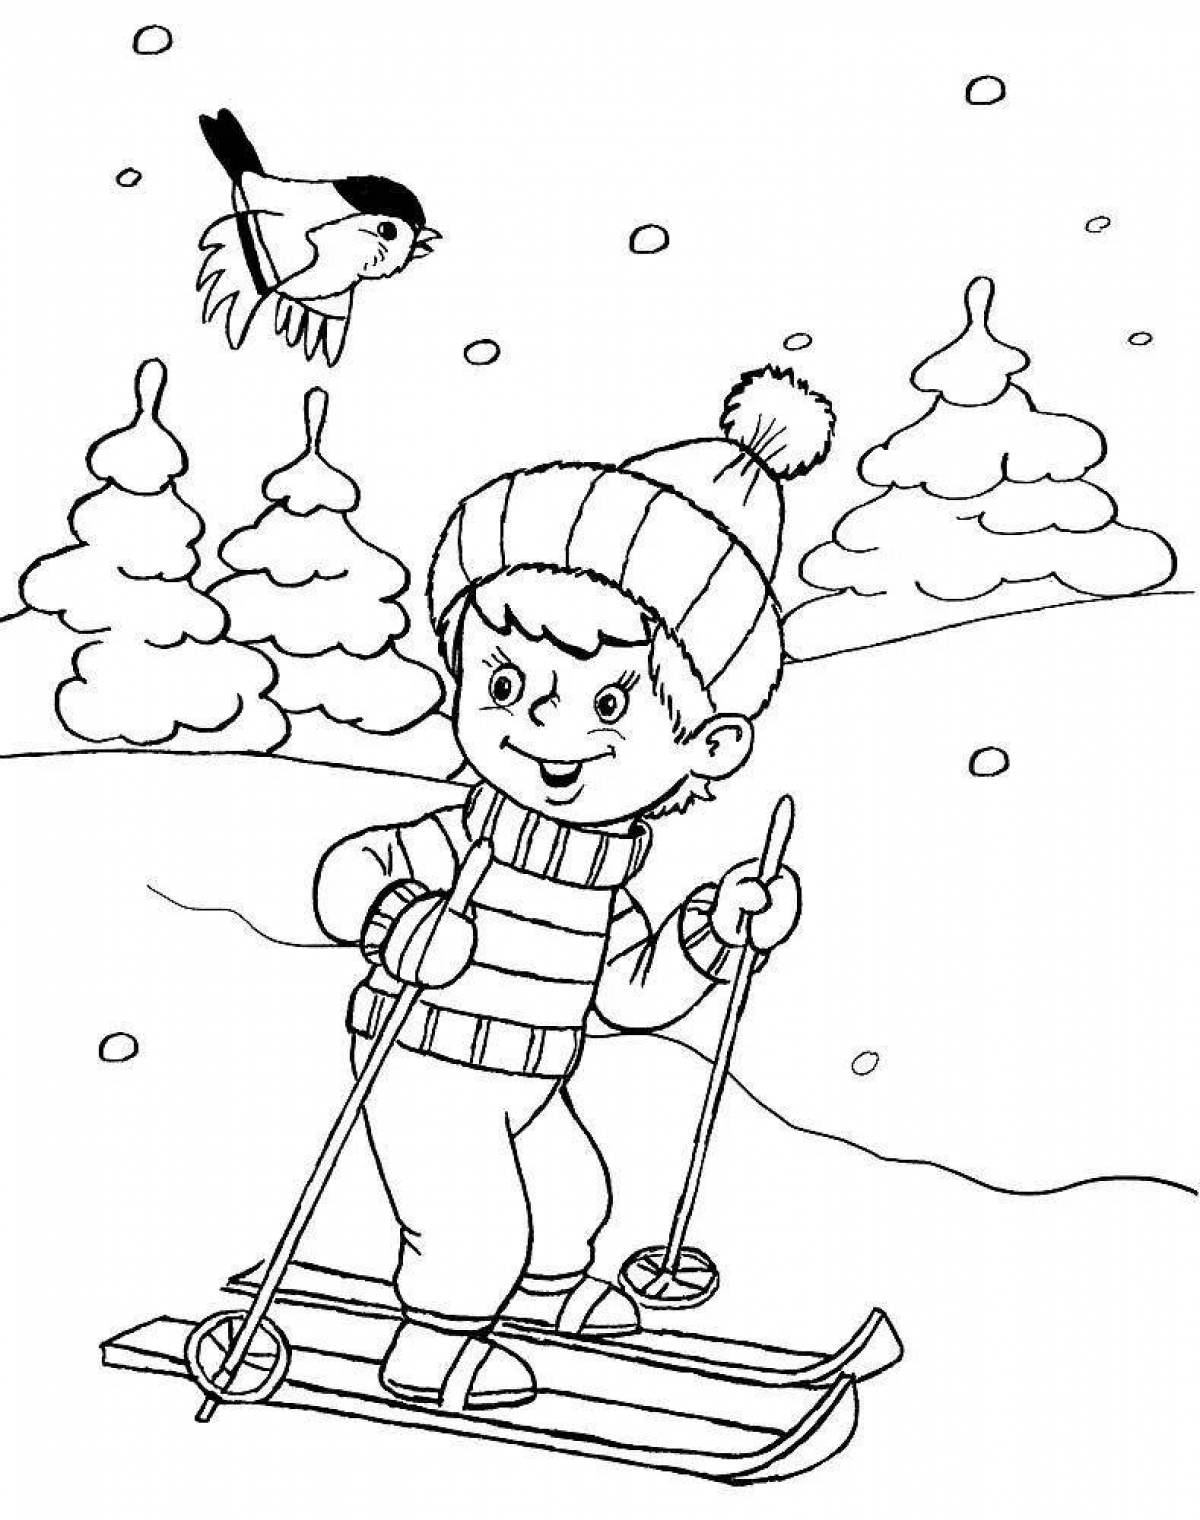 Glitter winter coloring book for kids